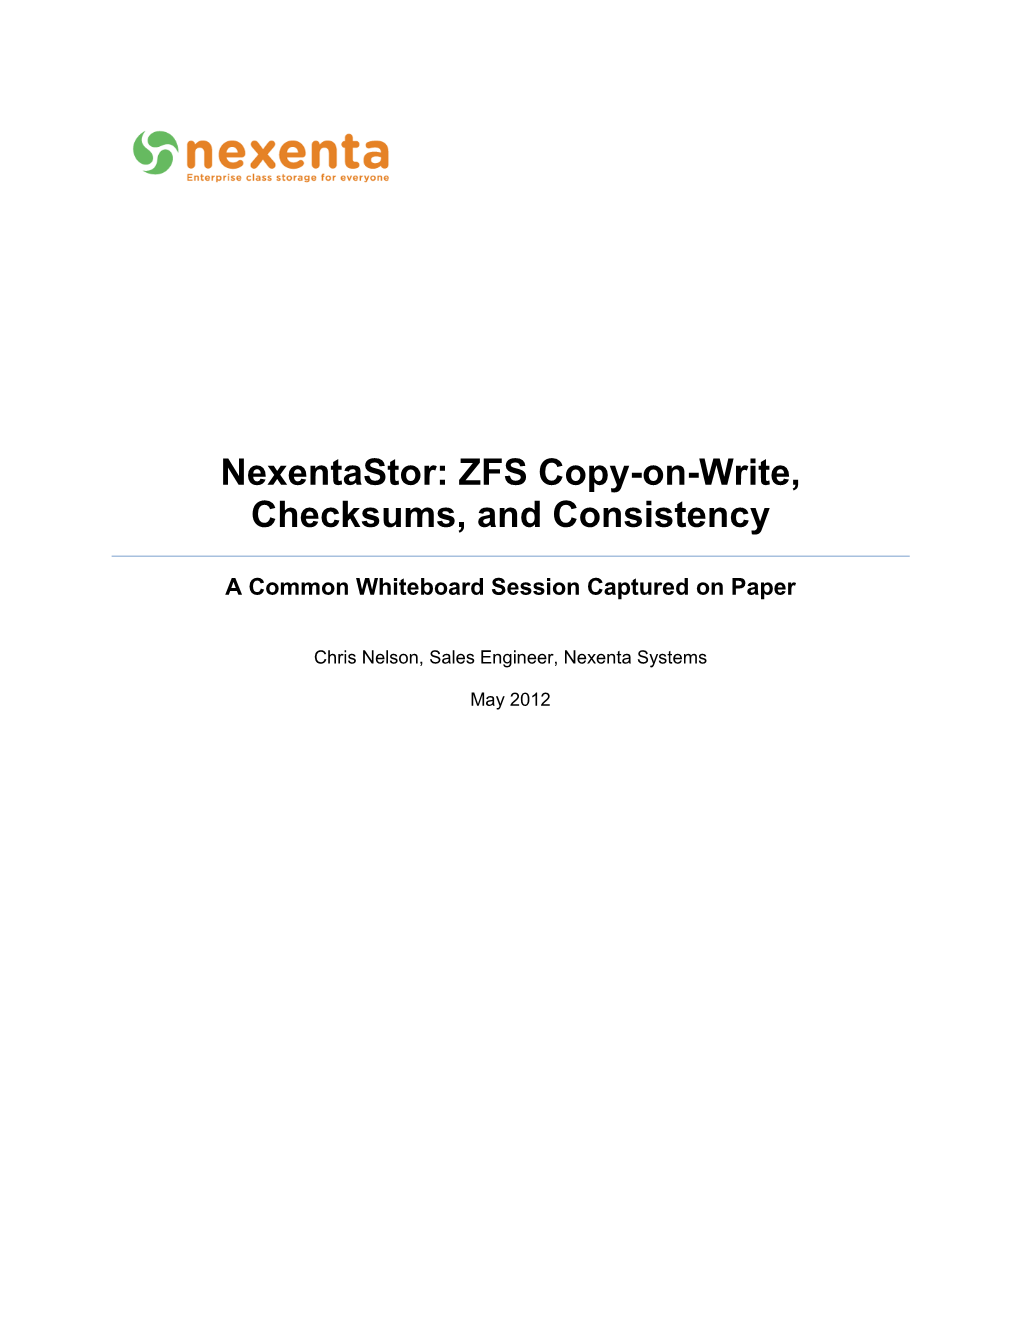 Nexentastor: ZFS Copy-On-Write, Checksums, and Consistencya